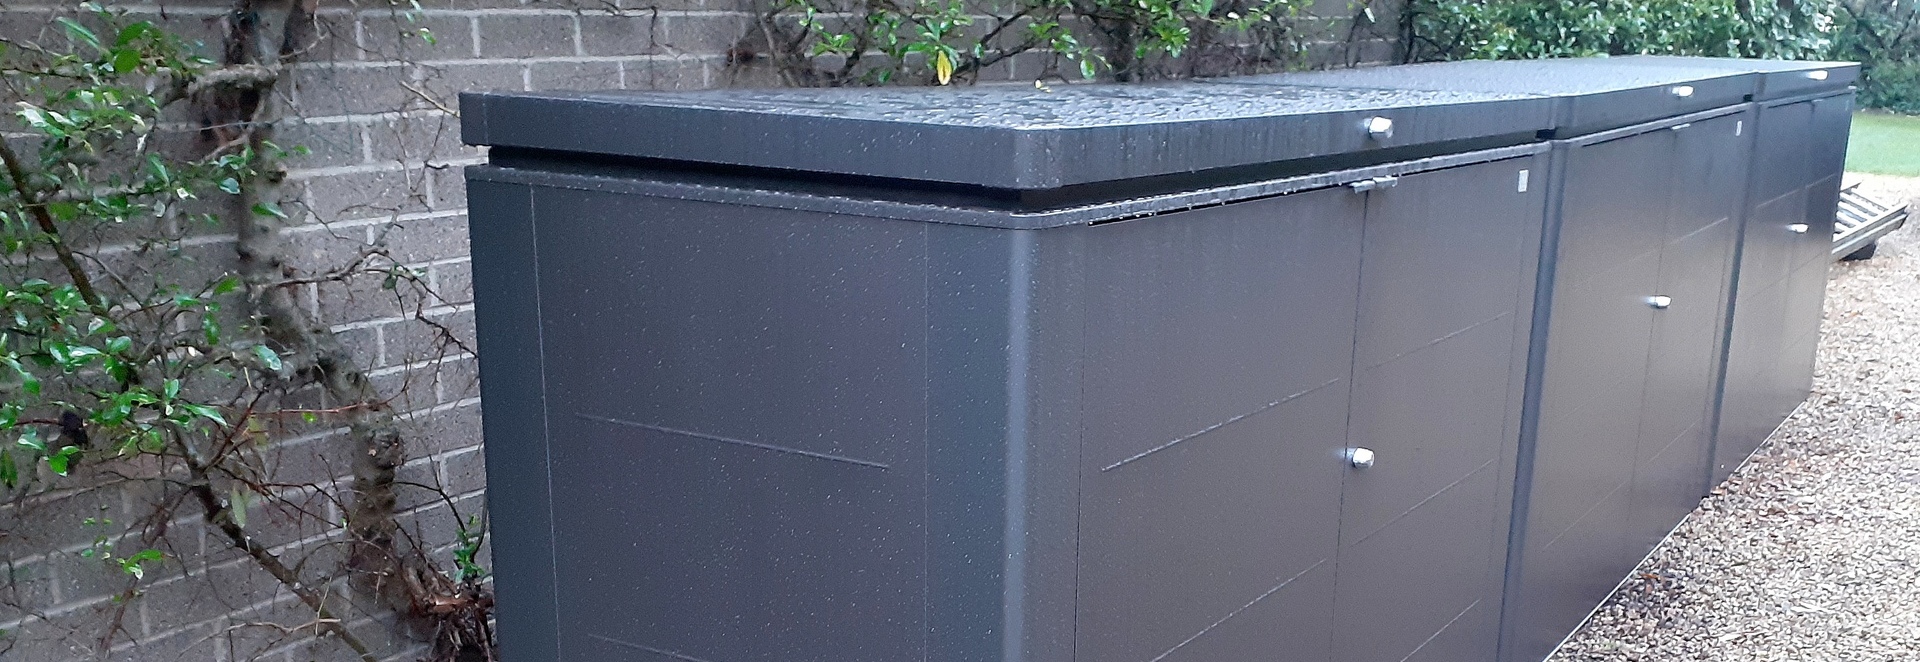 The ultimate outdoor garden storage unit - Biohort HighBoard 200  Storage Unit | Supplied + Fitted in Sandymount, Dublin 4 by Owen Chubb Landscapers